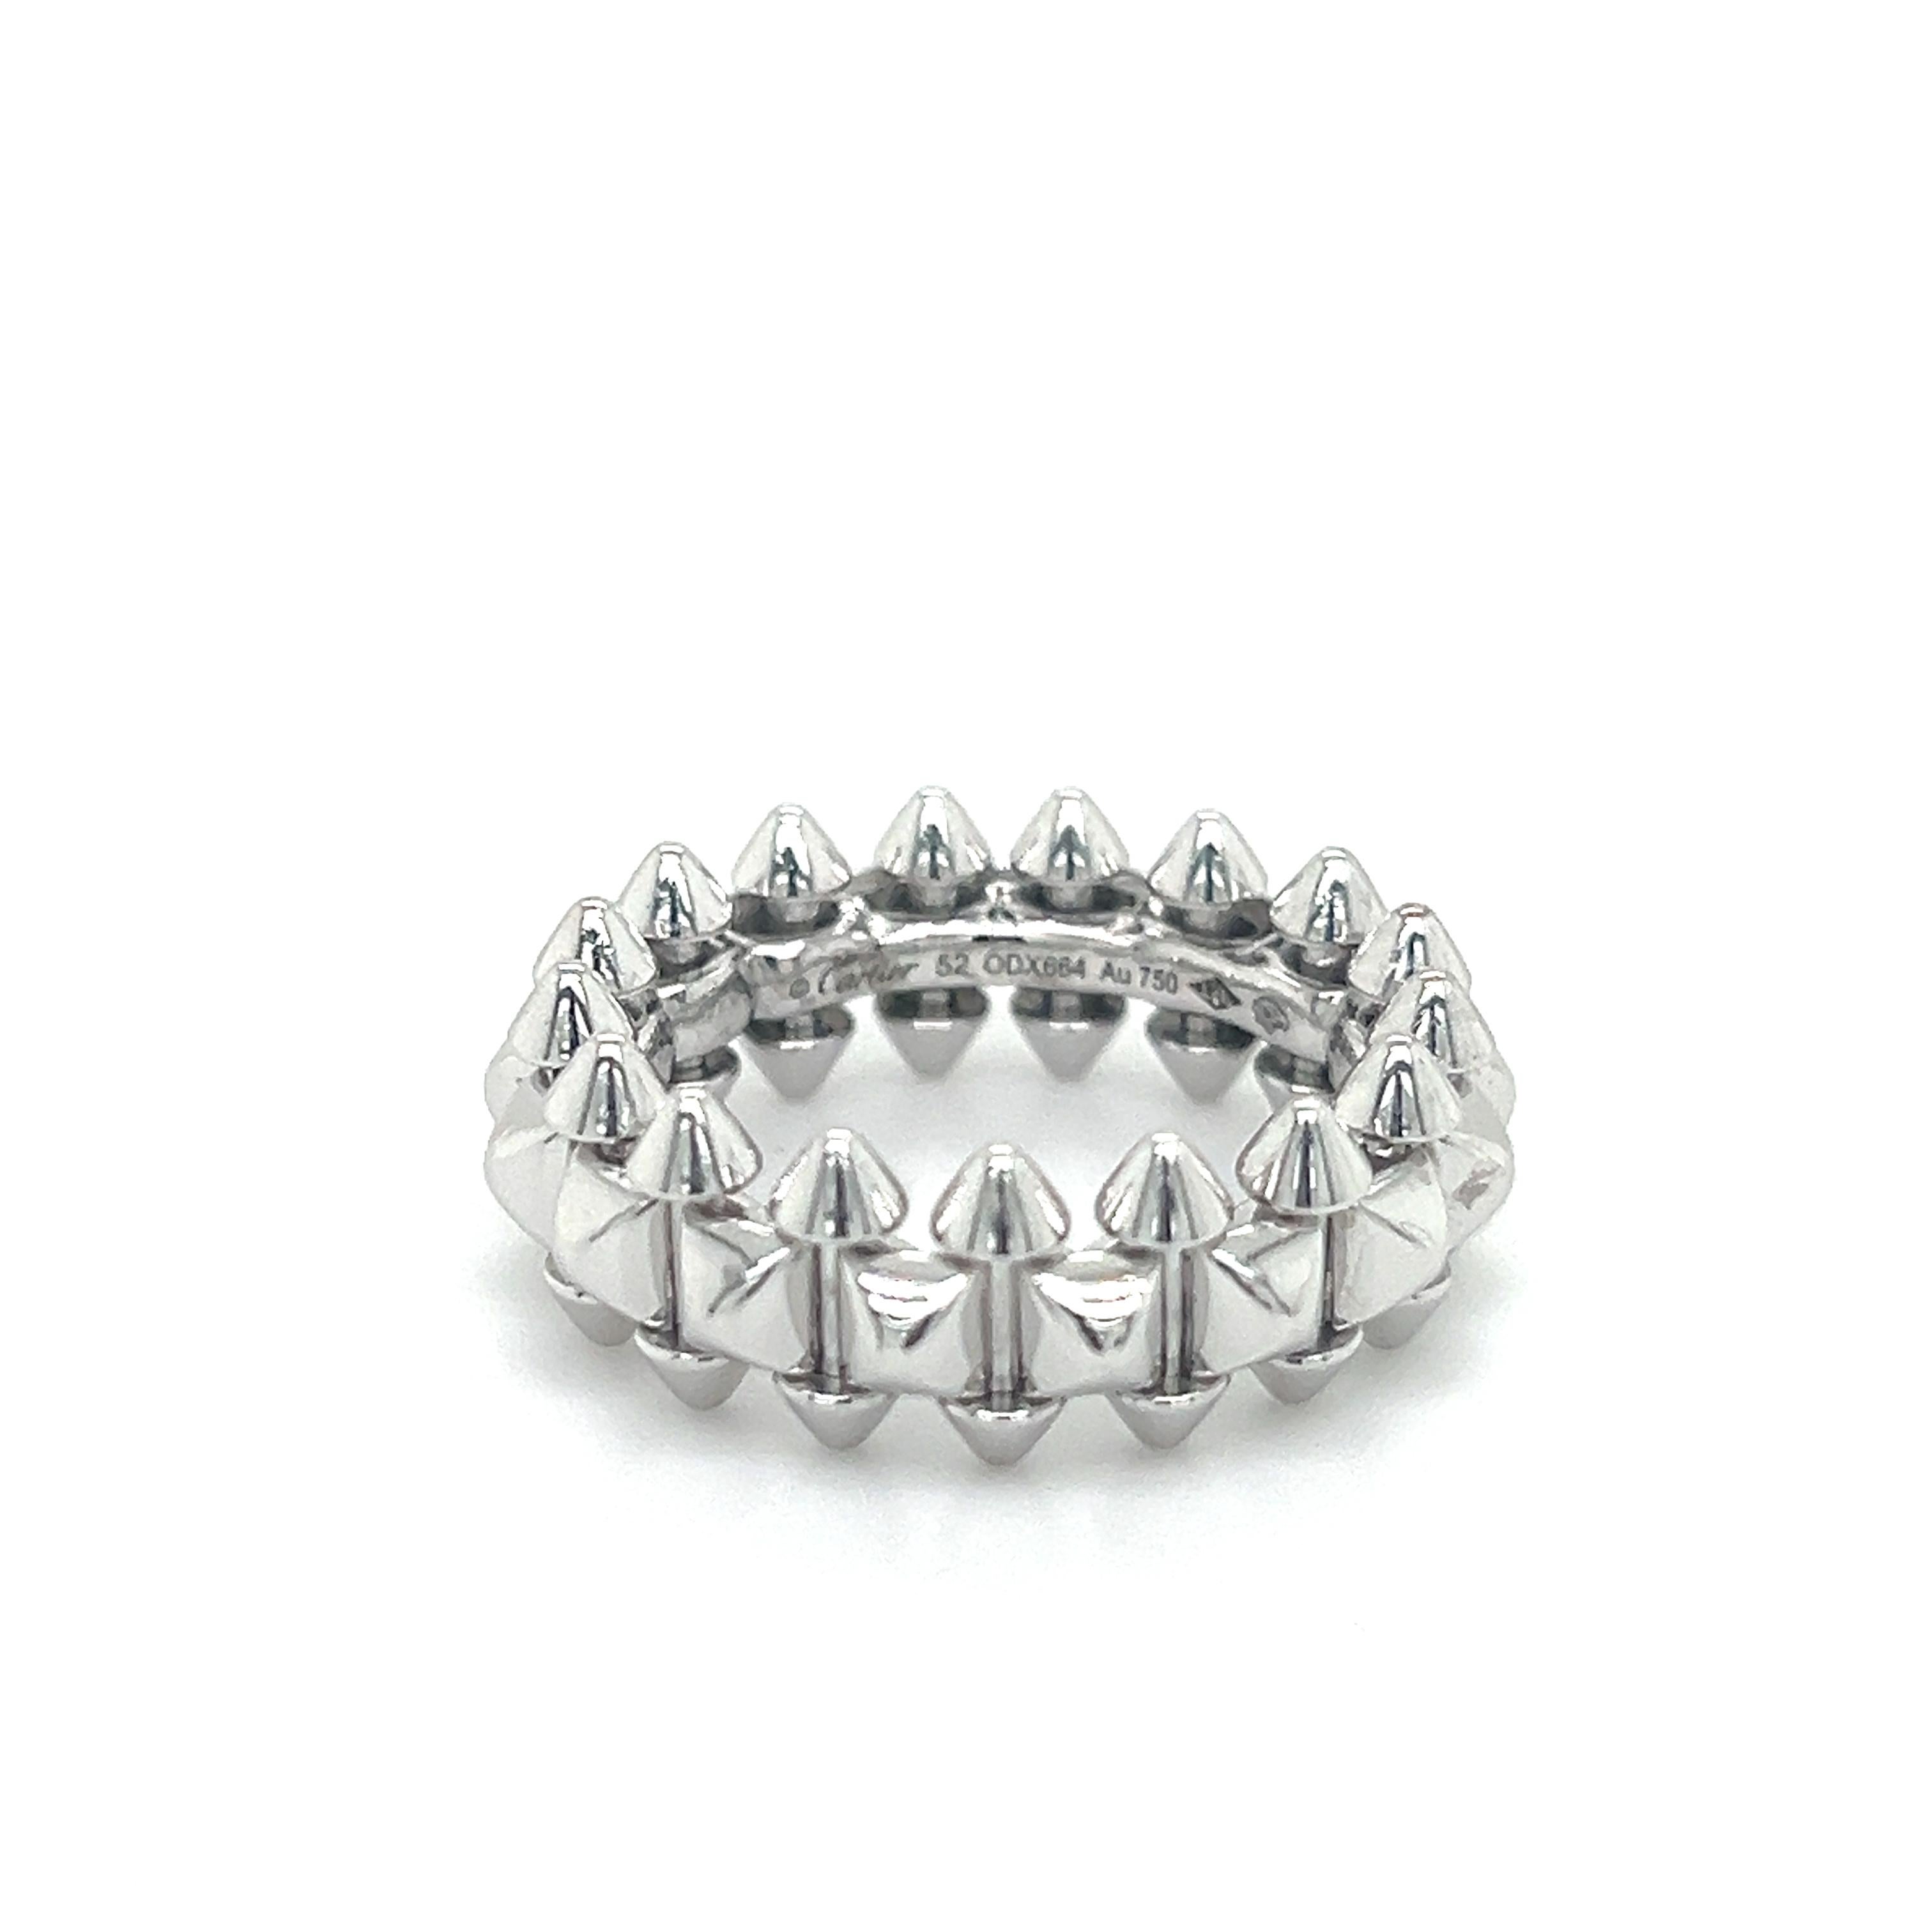 Beautiful ring from famed designer Cartier. The ring is from the Clash de Cartier collection. This model is crafted in 18k white gold with a rhodiumized finish, it is the medium model of the design showing a 8 mm width. 
The design shows spikes at